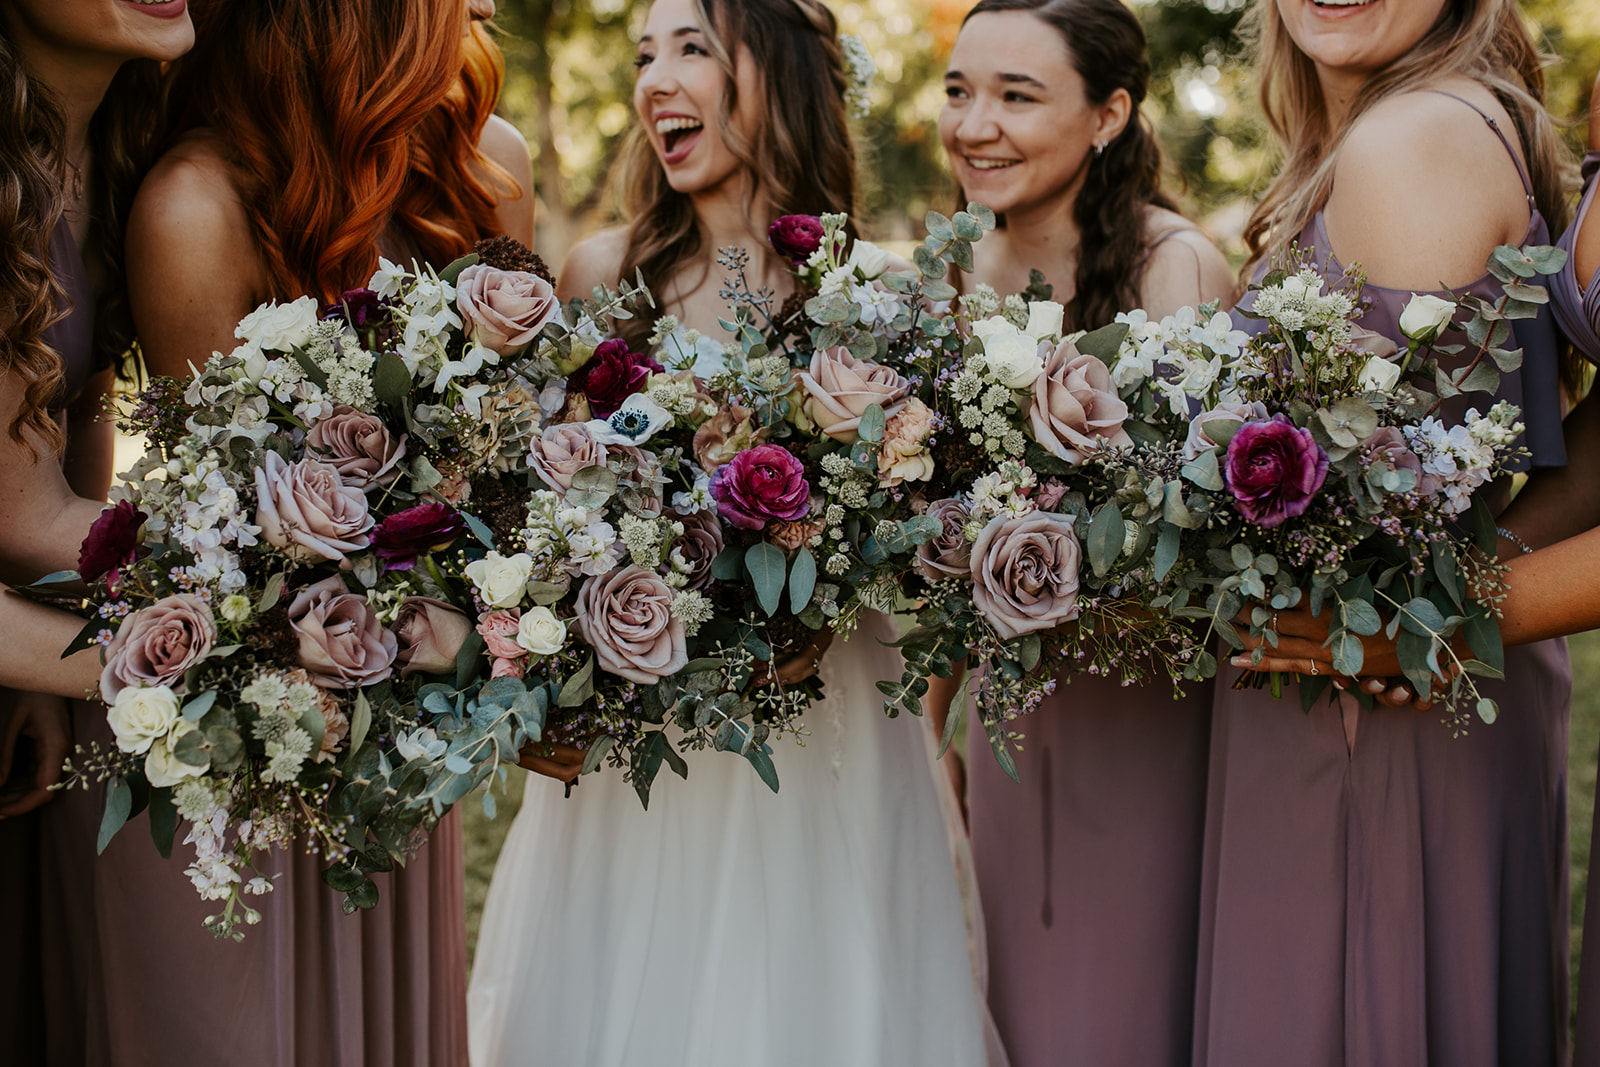 Bride and bridesmaids holding bouquets with purple flowers and dresses.